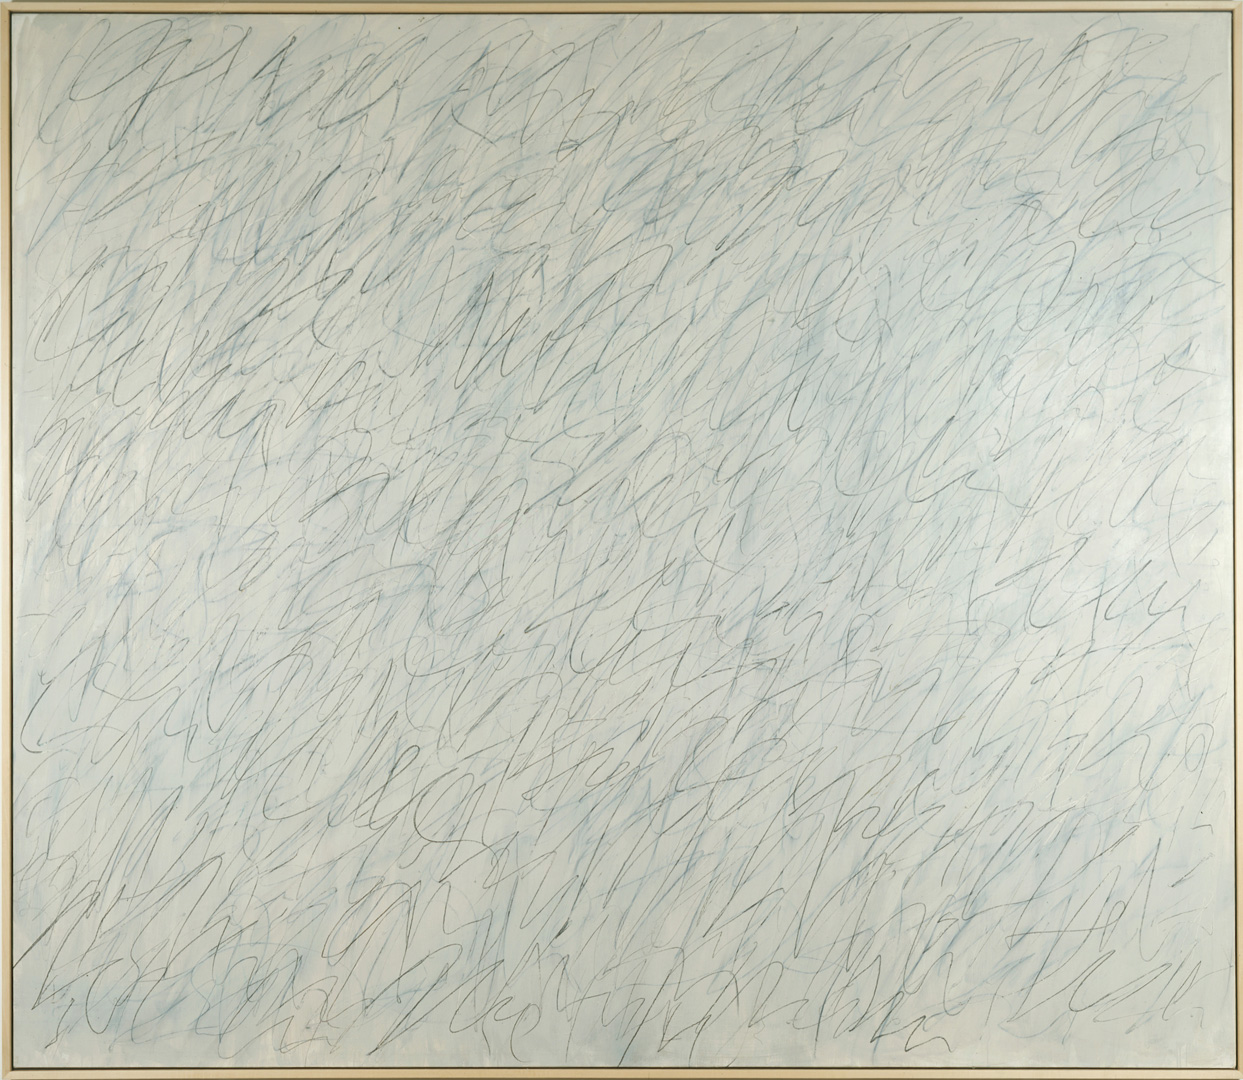 Cy Twombly - Nini's Painting [Rome], 1971, oil based house paint, wax crayon, and lead pencil on canvas